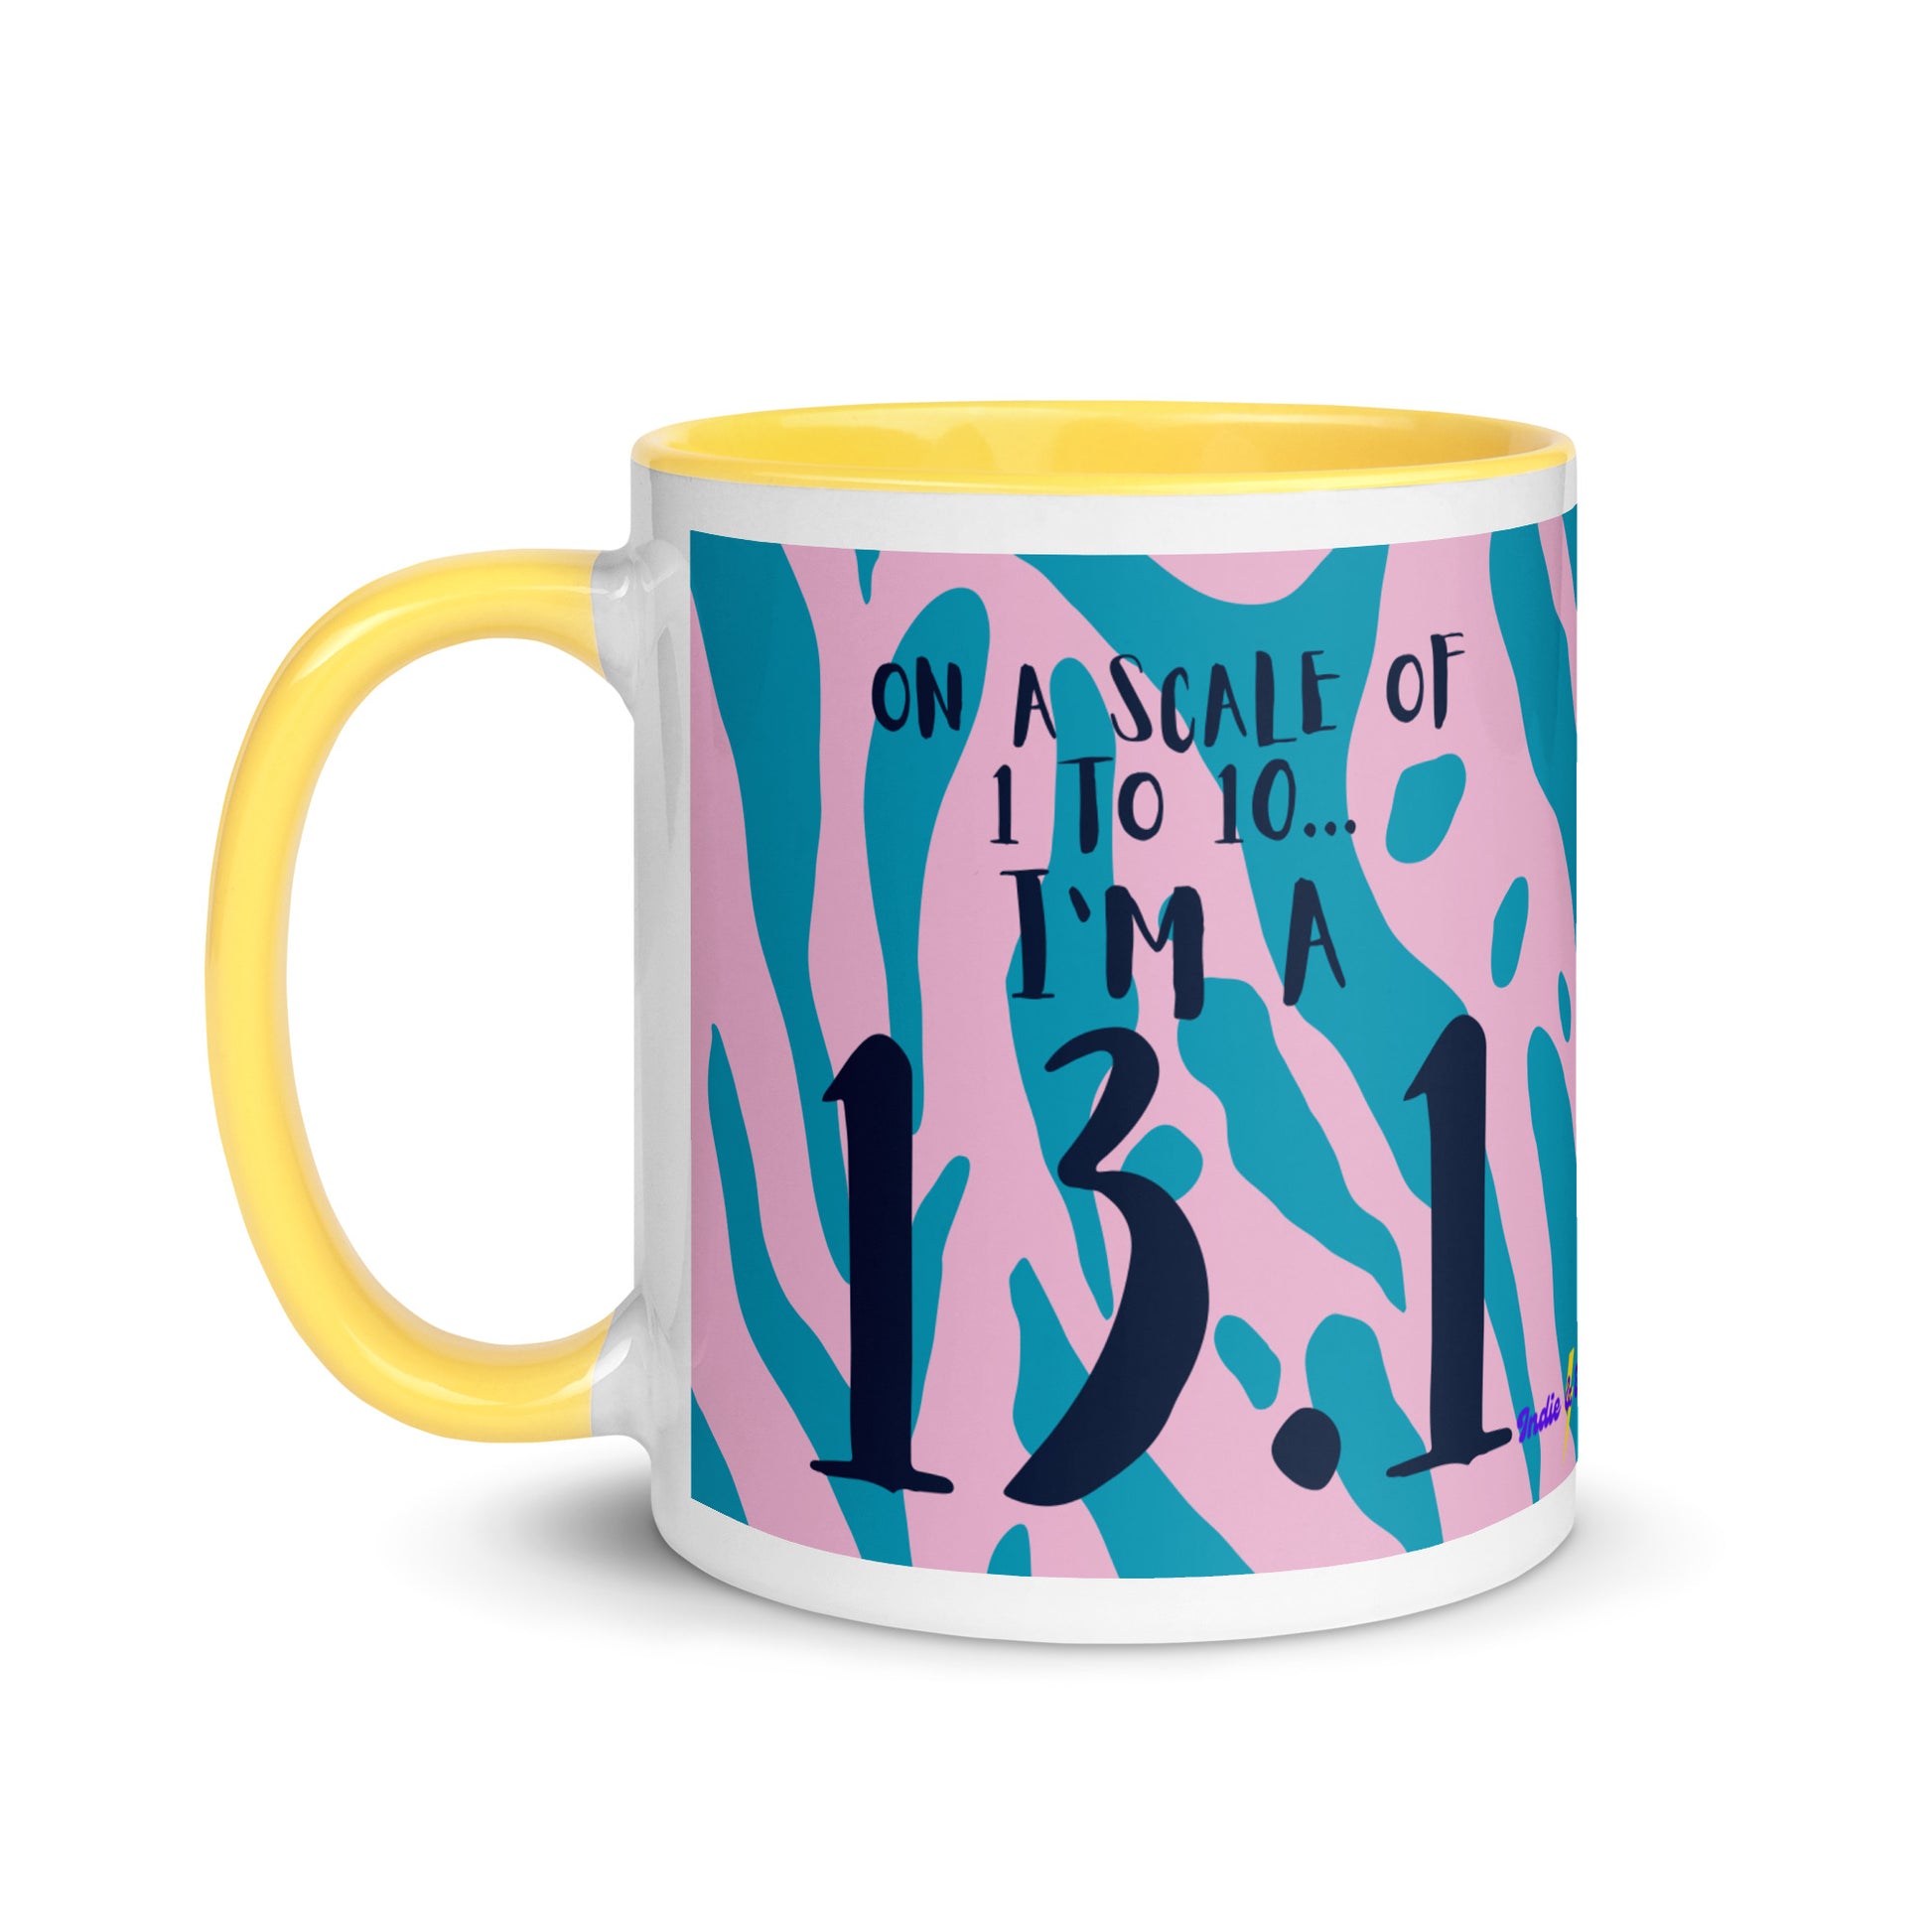 yellow rimmed and handled mug with a pink and blue leopard print design and the words on a scale of 1 to 10 I'm a 13.1. A gift for half marathon runners